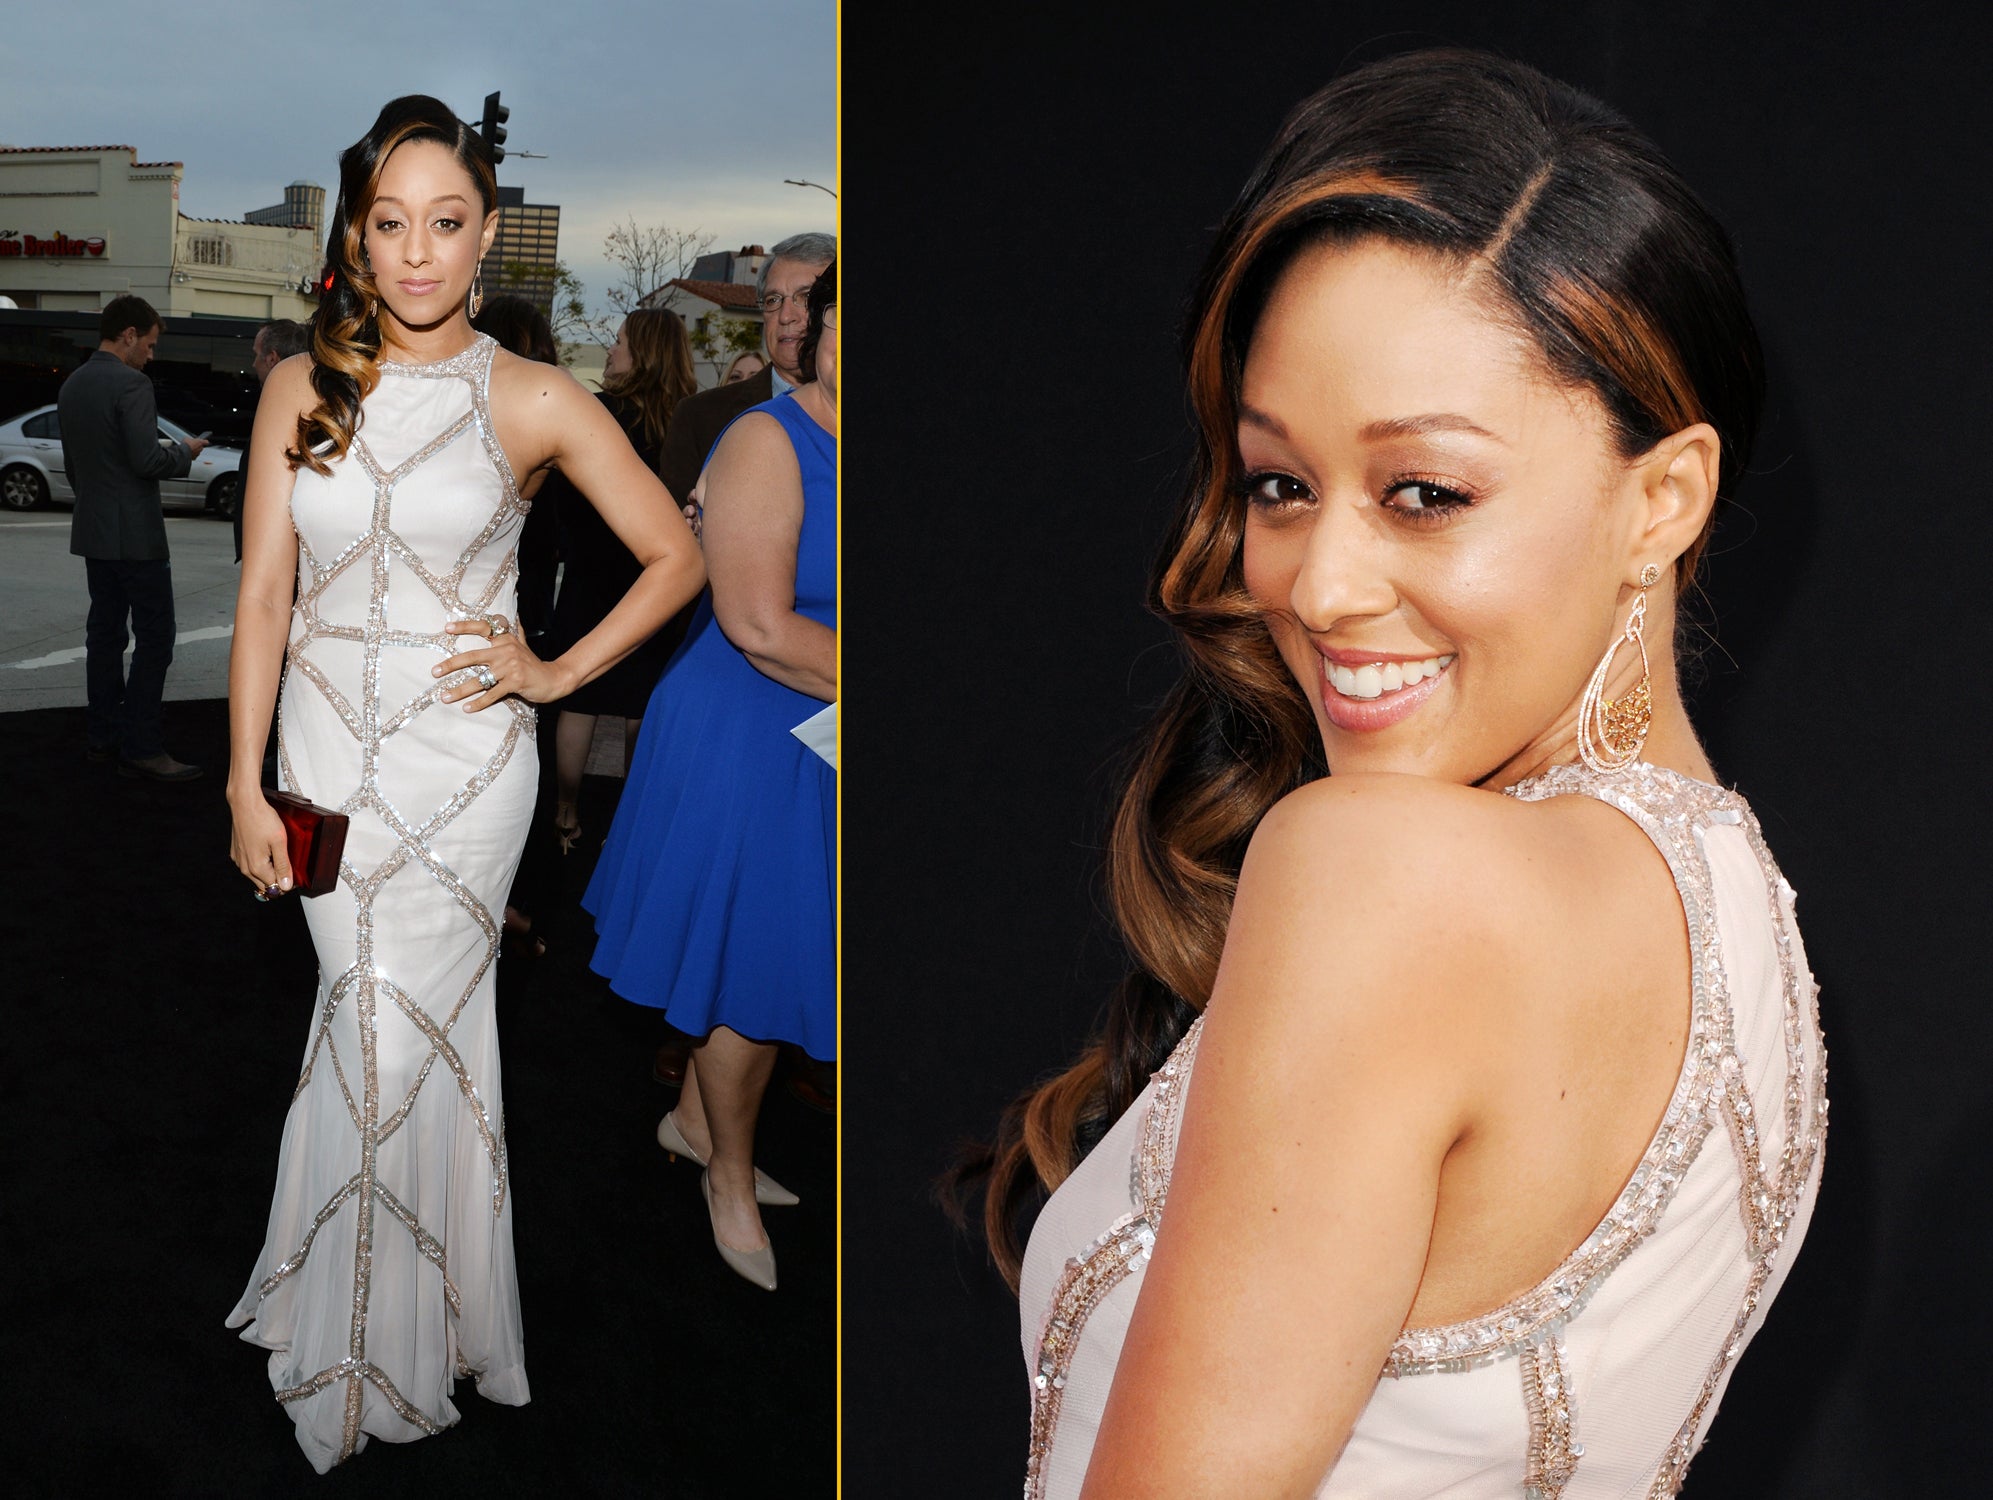 Tia Mowry's New Hairstyle Is Something We've Never Seen On Her Before
